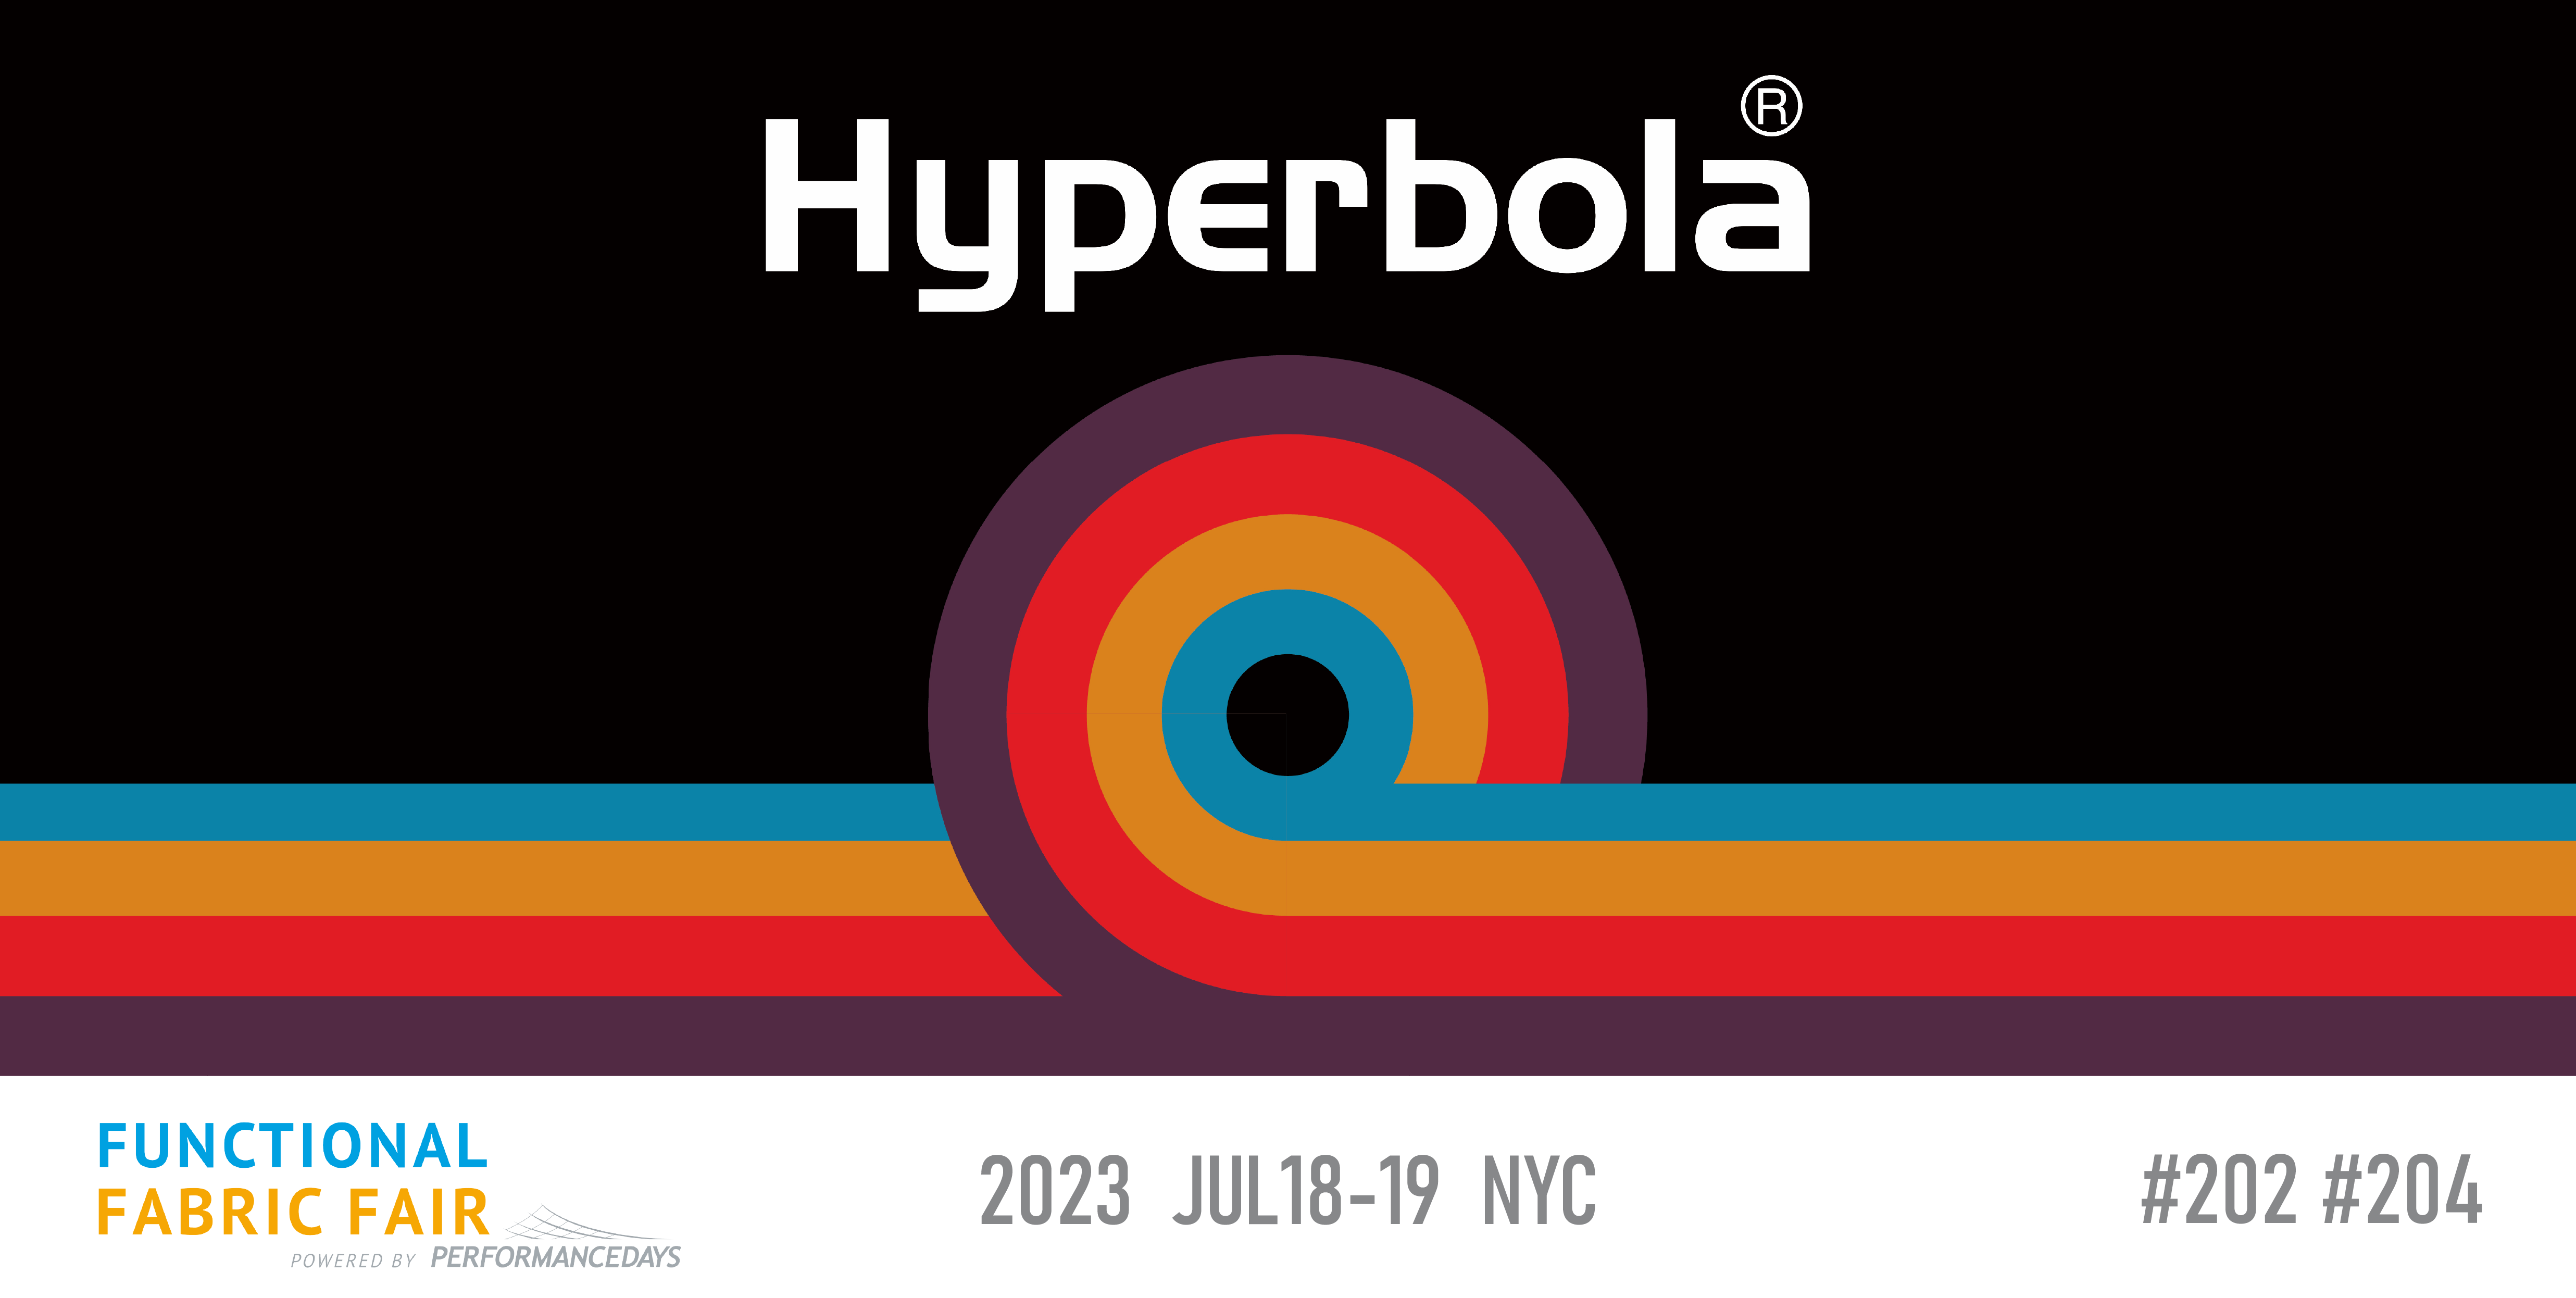 Hyperbola: Redefining Fabrics for the Future at Functional Fabric Fair NYC 2023 Jul 18-19™